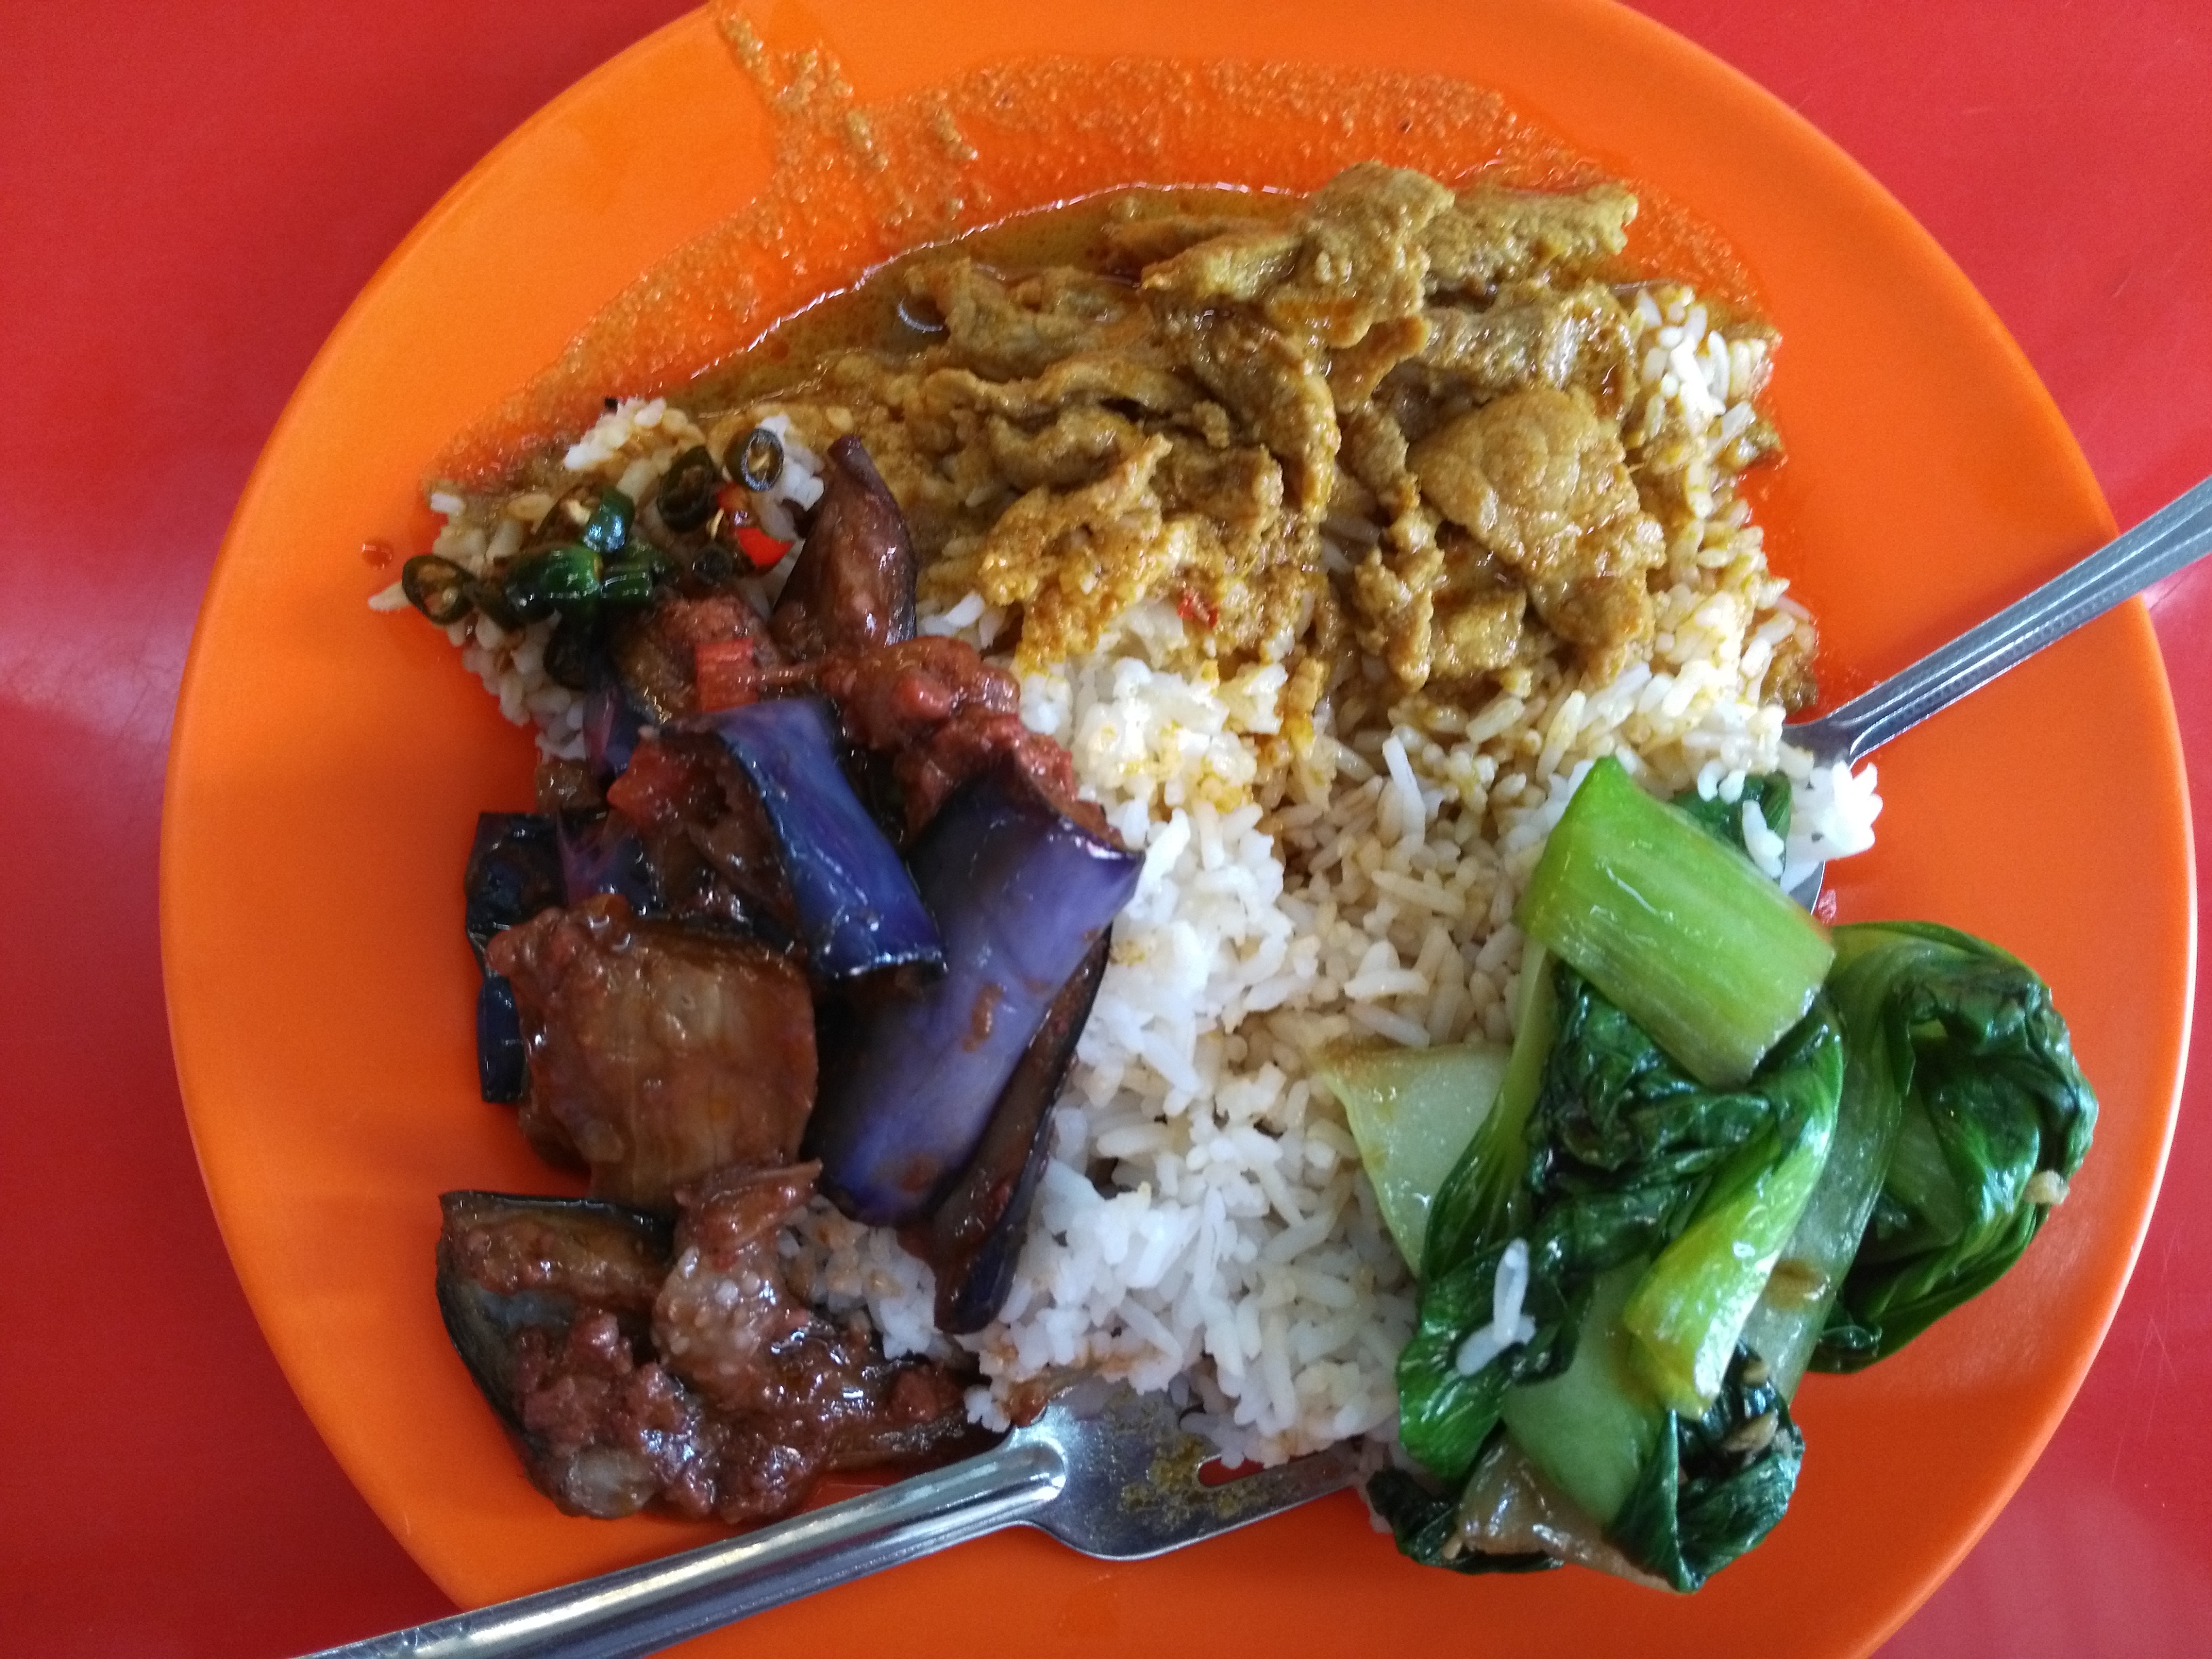 Eggplant, bok choy, and chicken curry in Chinatown, Kuala Lumpur.